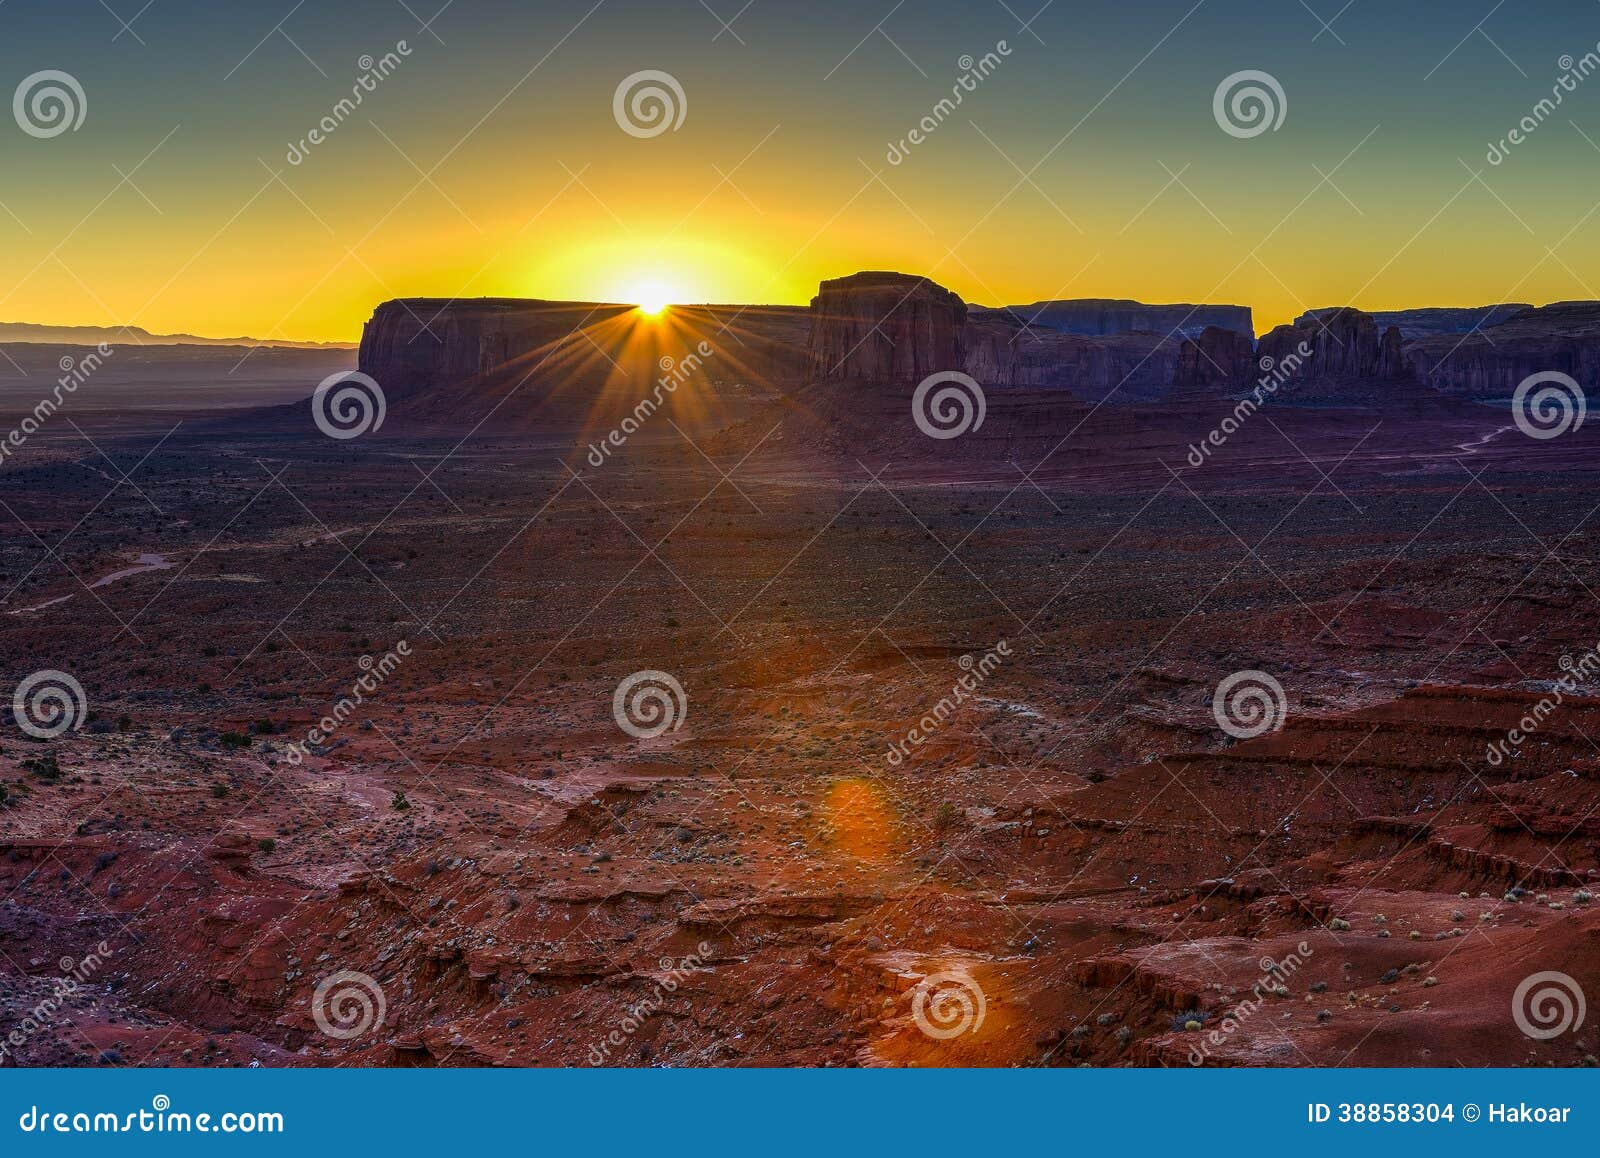 sunrise at monument valley, navajo nation